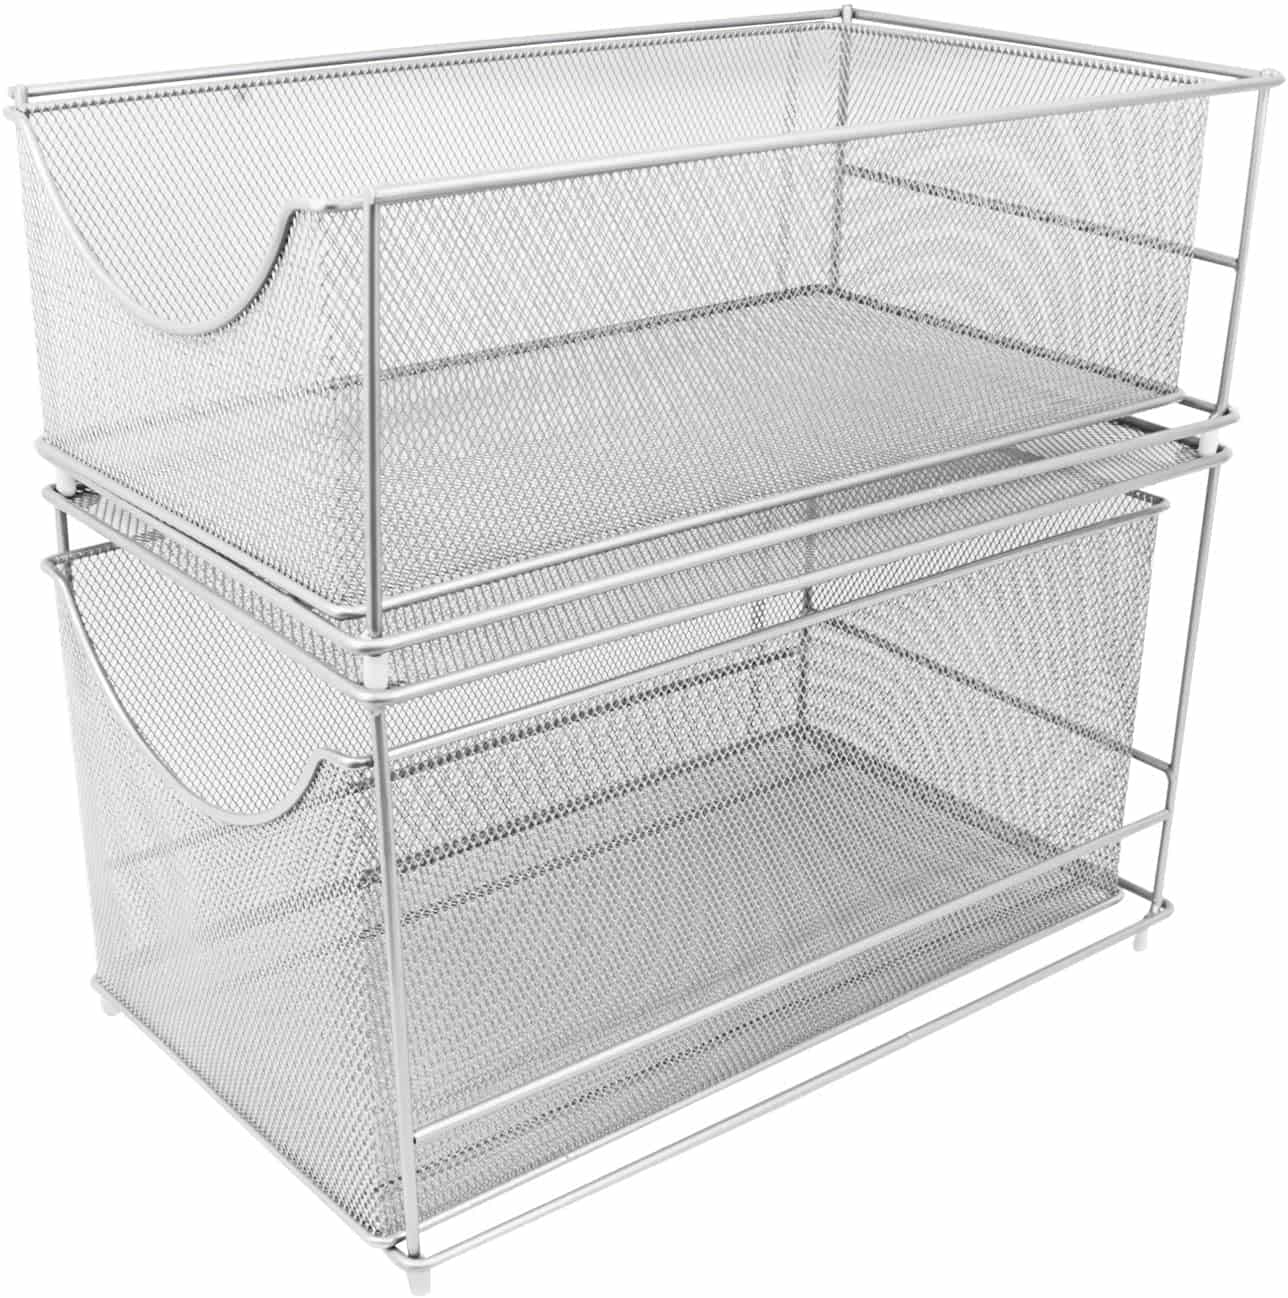 https://www.prioritizedliving.com/wp-content/uploads/2020/04/cabinet-drawers.jpg